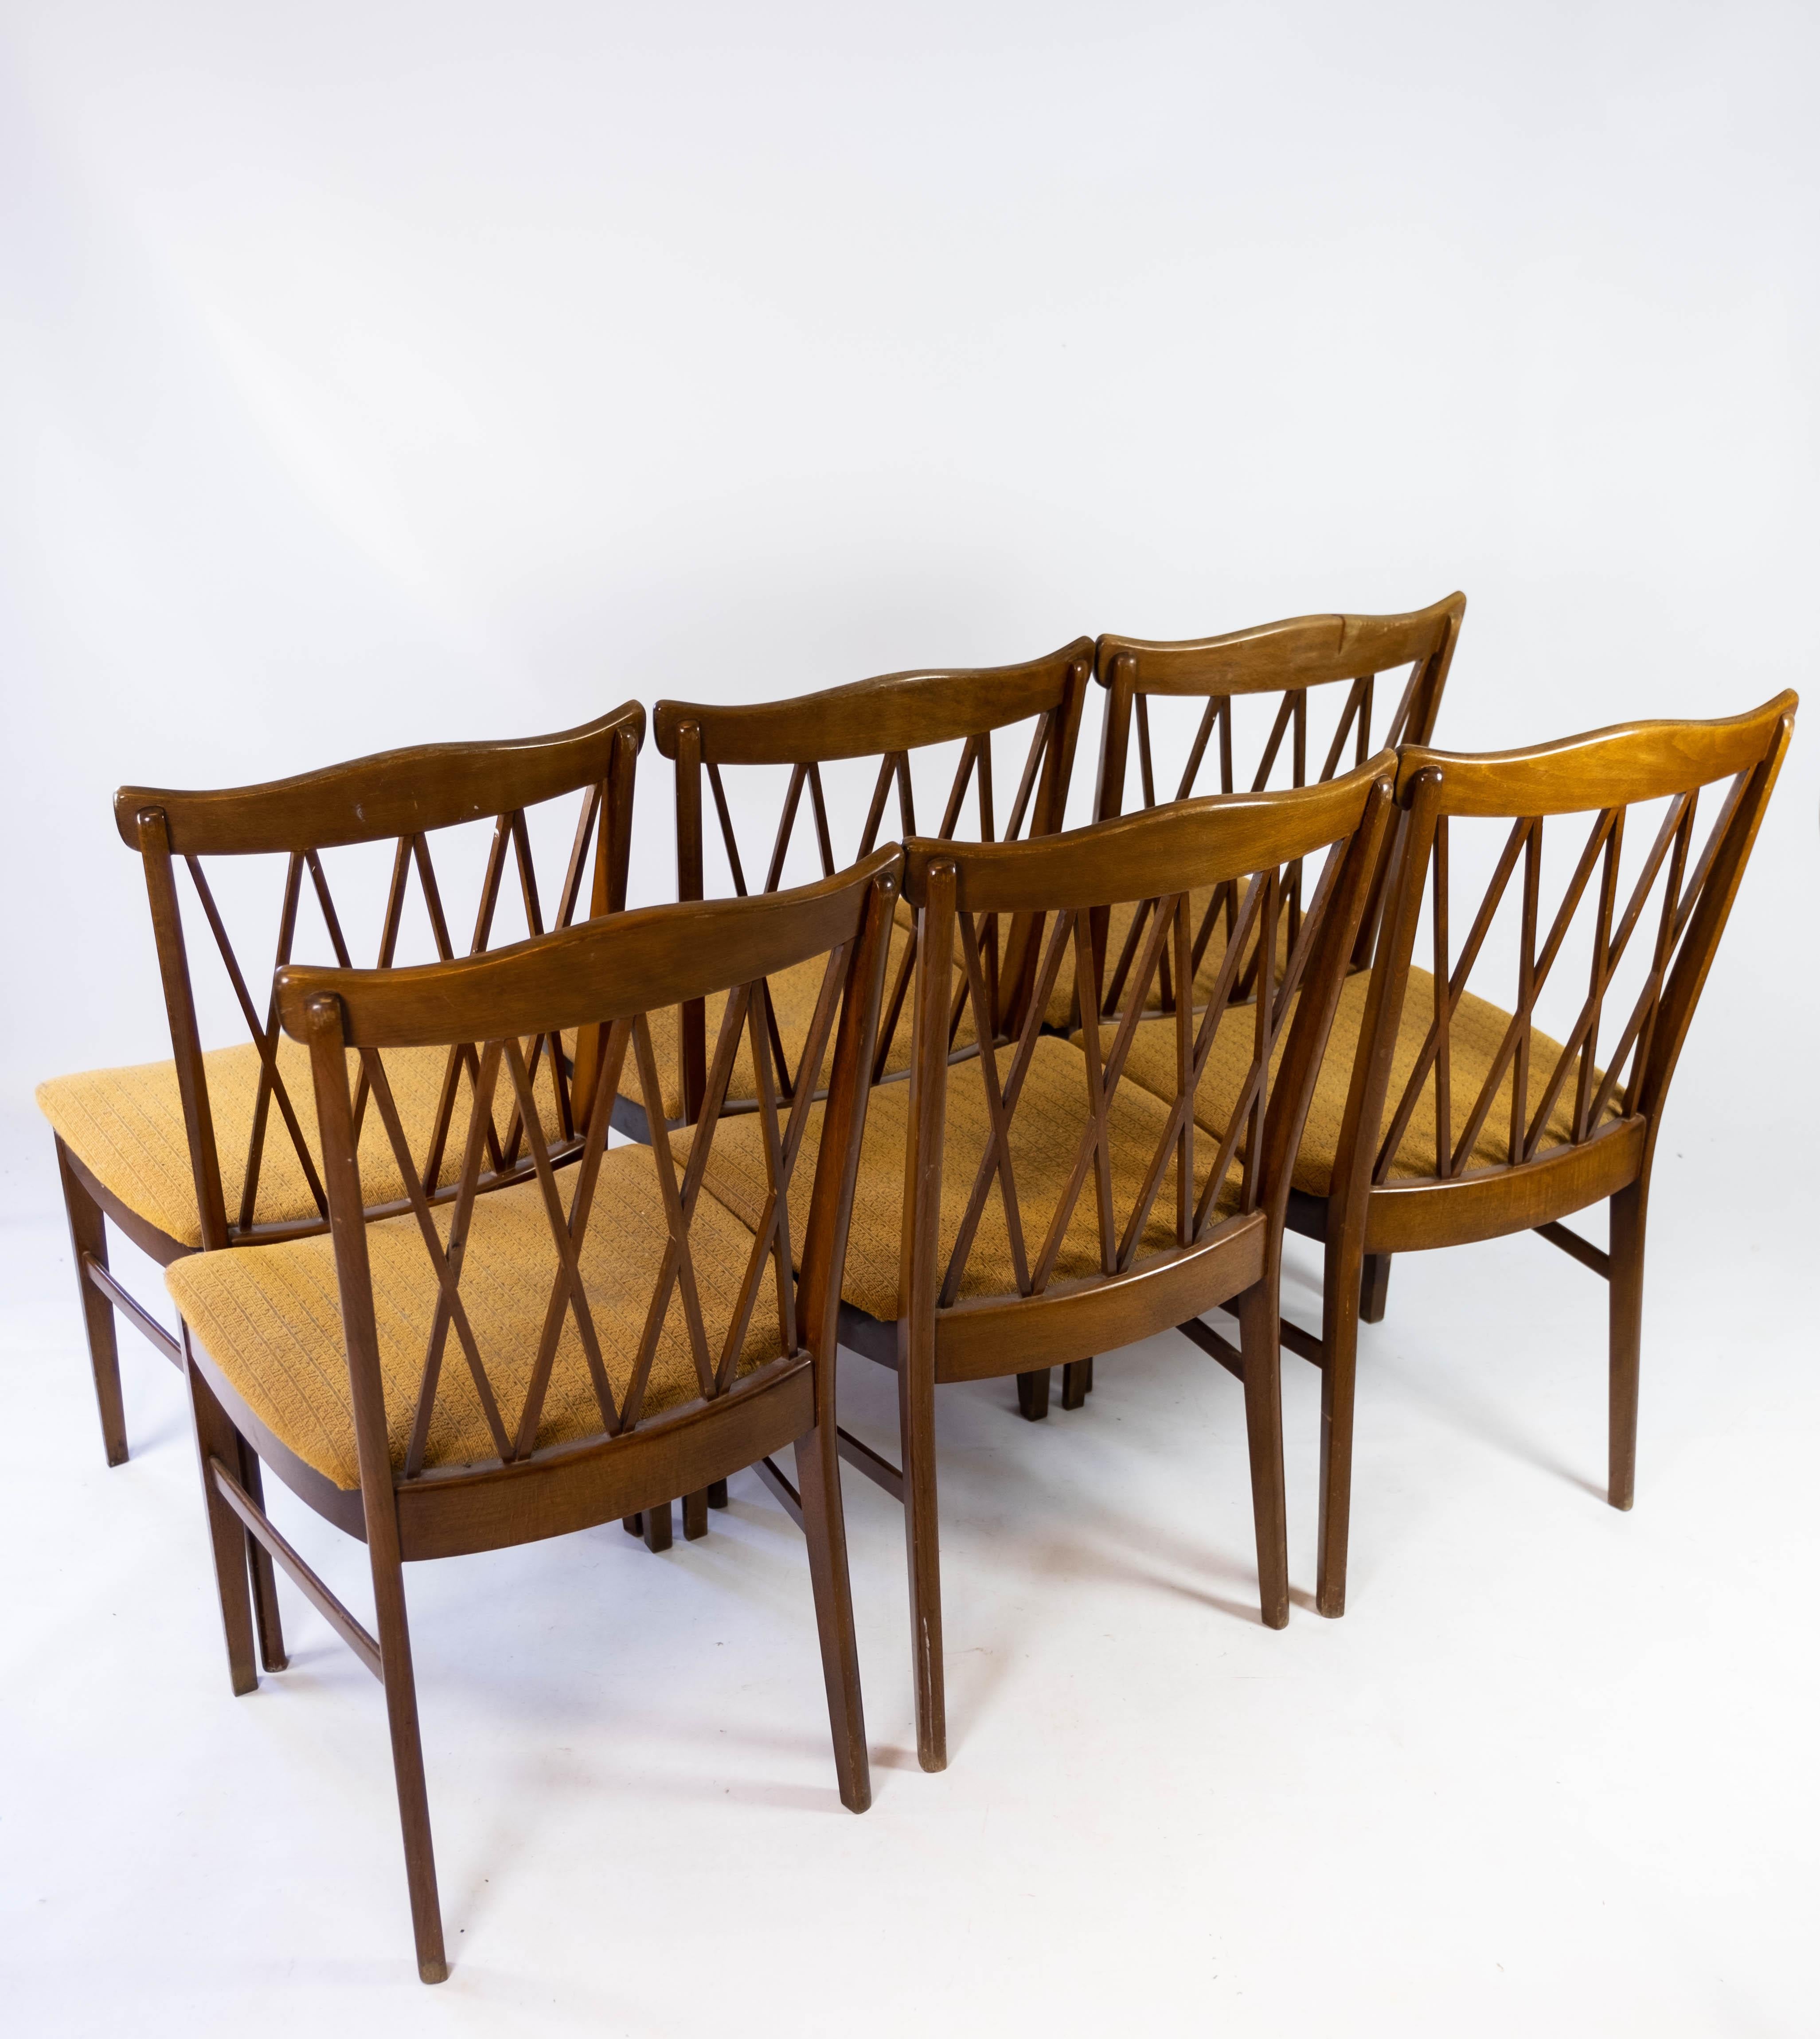 Danish Set of Dining Room Chairs of Walnut and Upholstered with Dark Fabric, 1940s For Sale